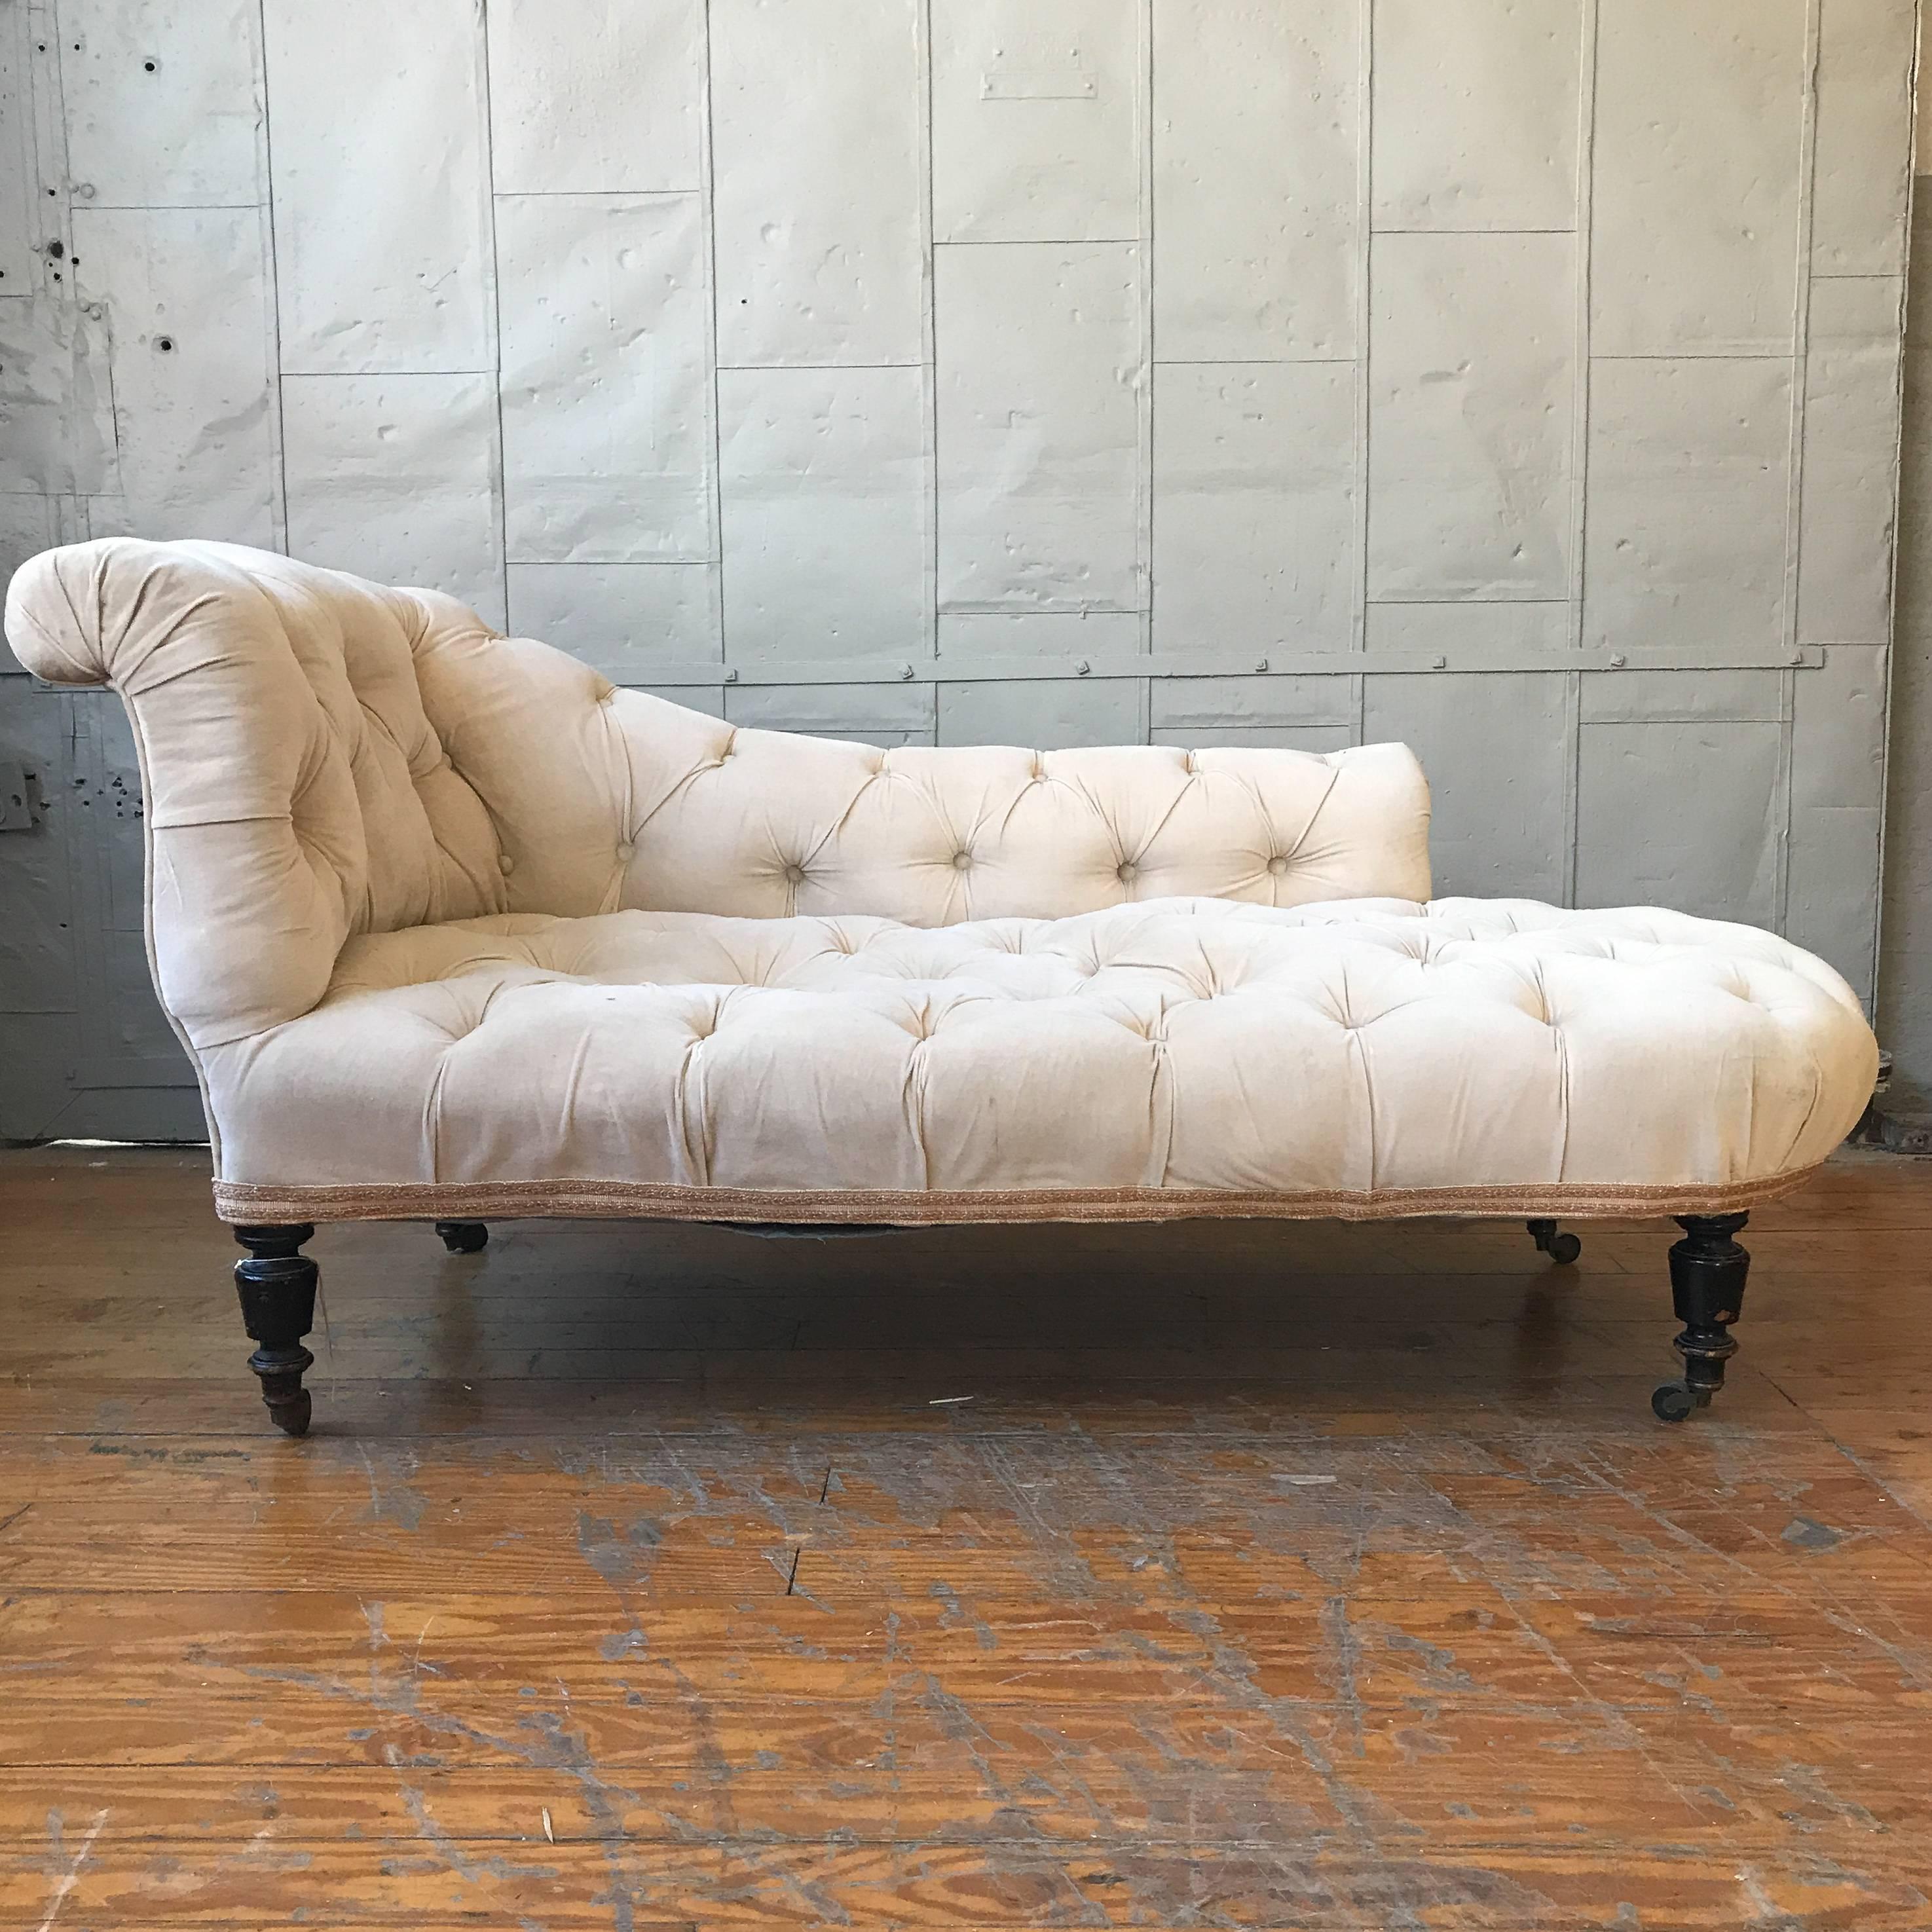 Small French asymmetrical tufted Napoleon III chaise longue, late 19th century.